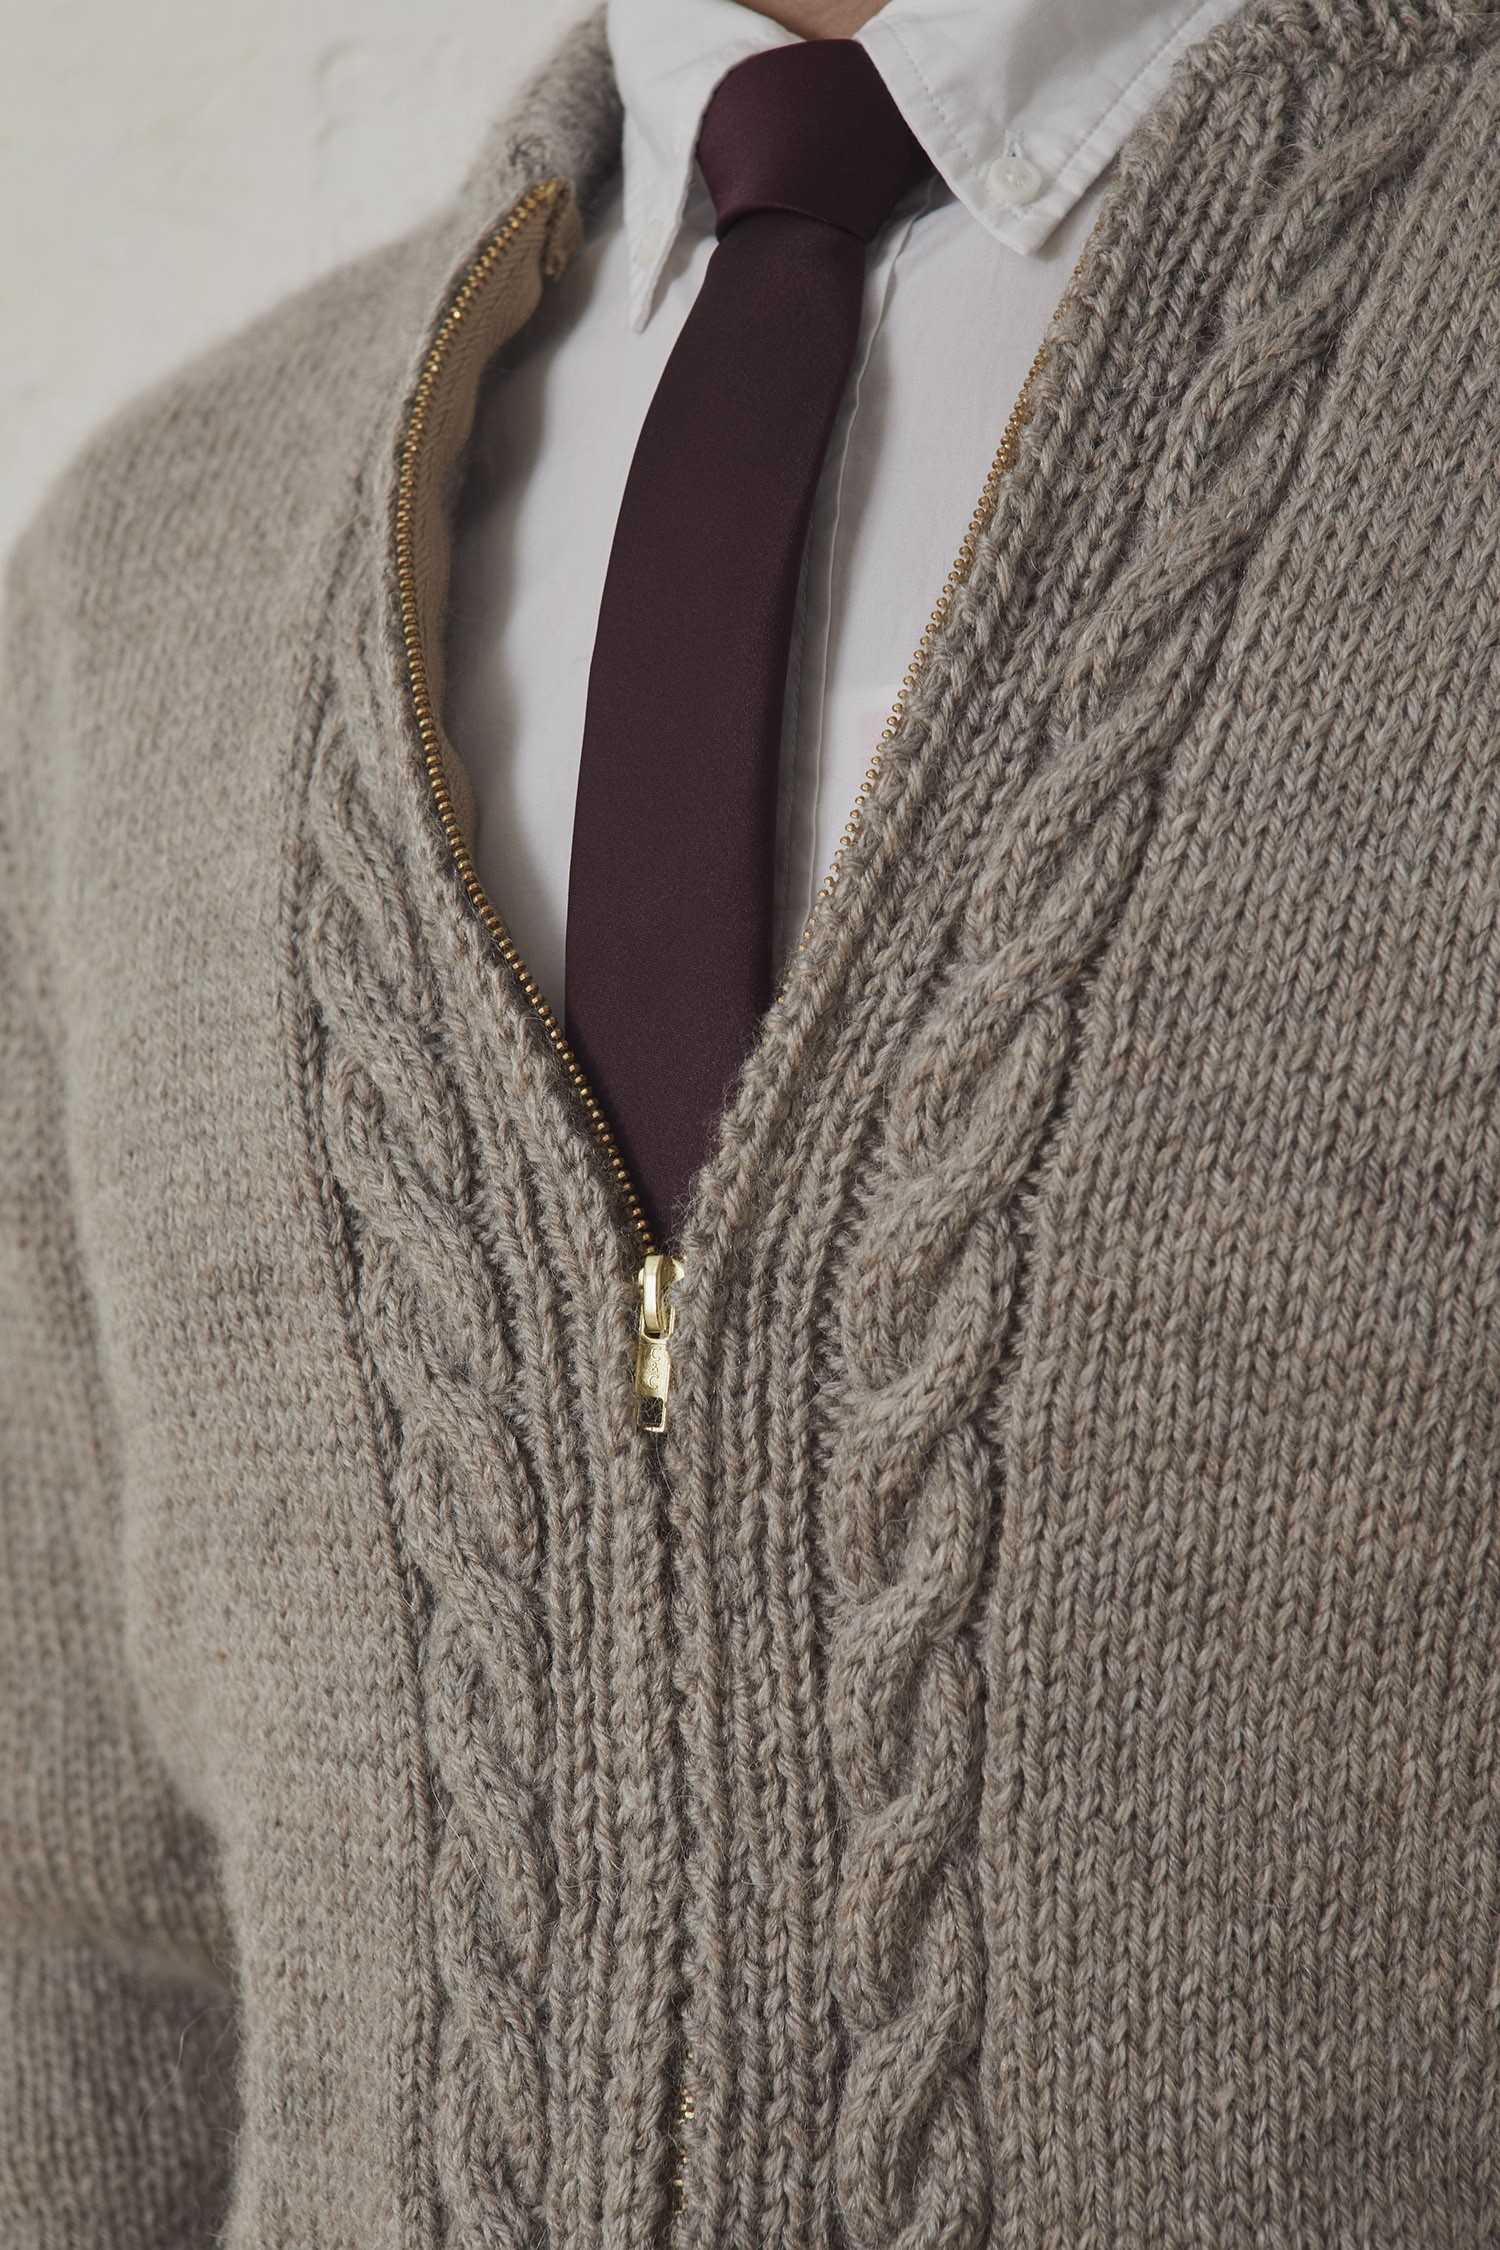 Free Men's Knitting Pattern for a Neighborly Cardigan